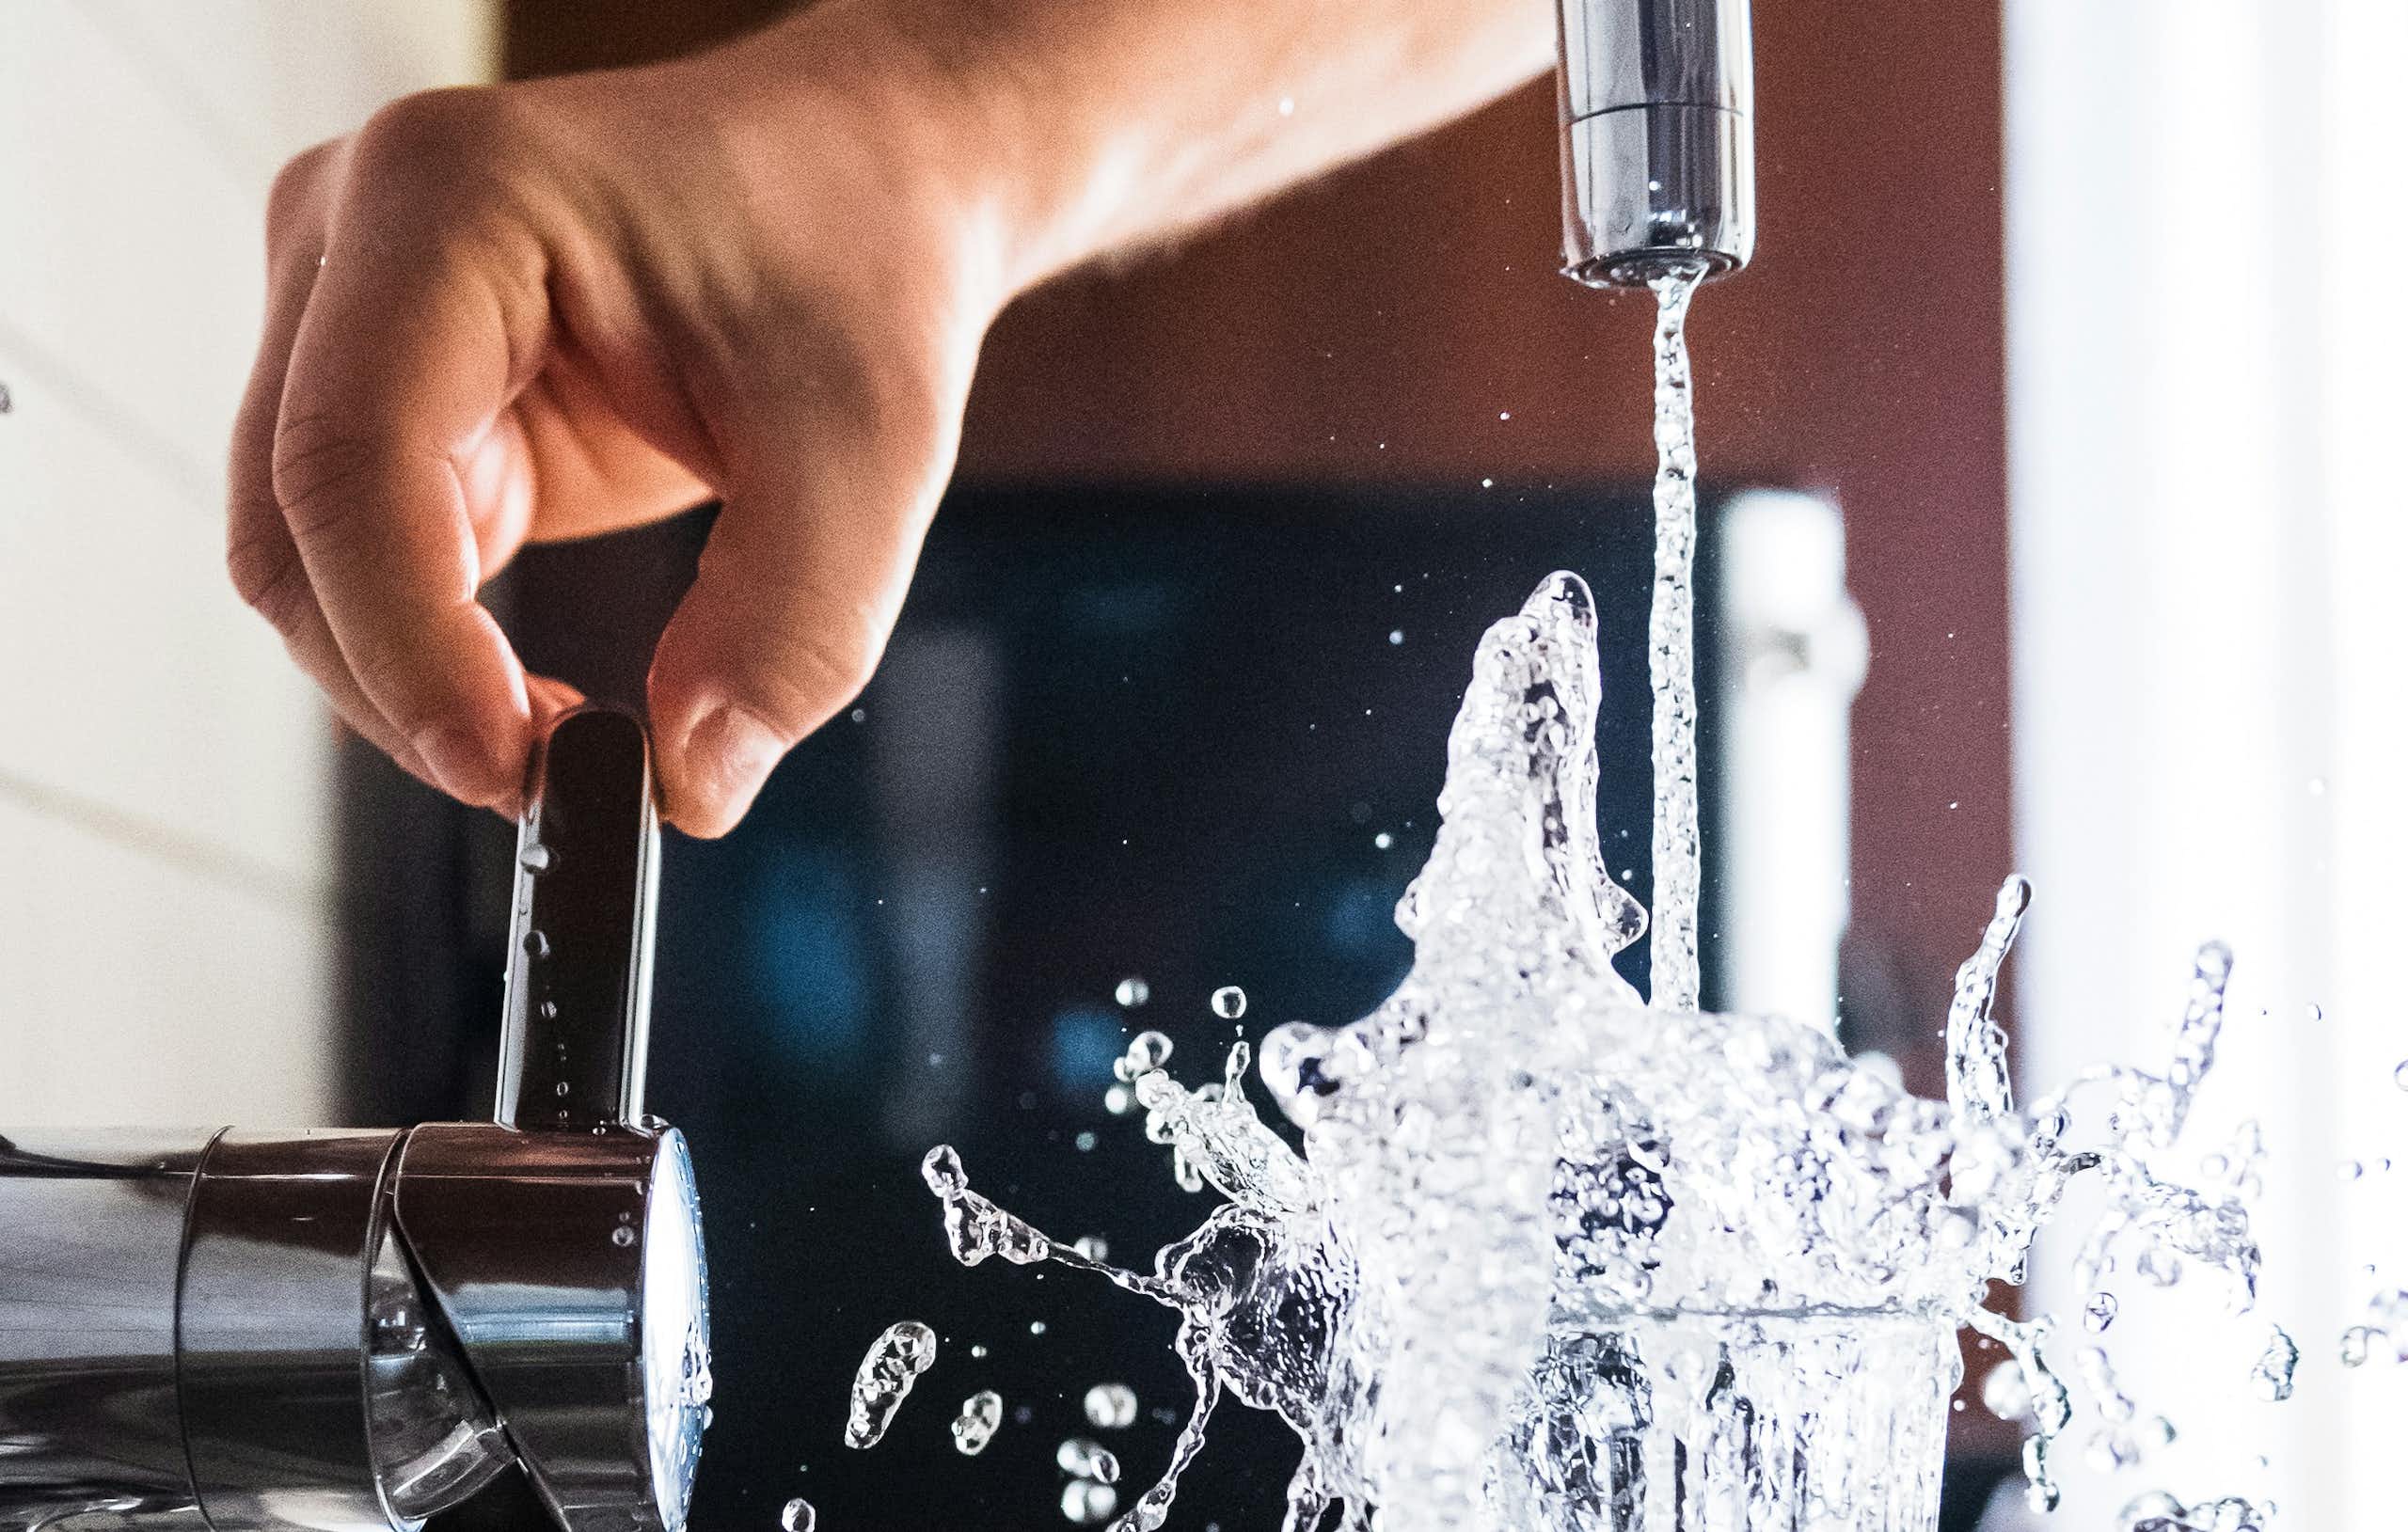 A hand turns on a faucet and water splashes form a full glass.